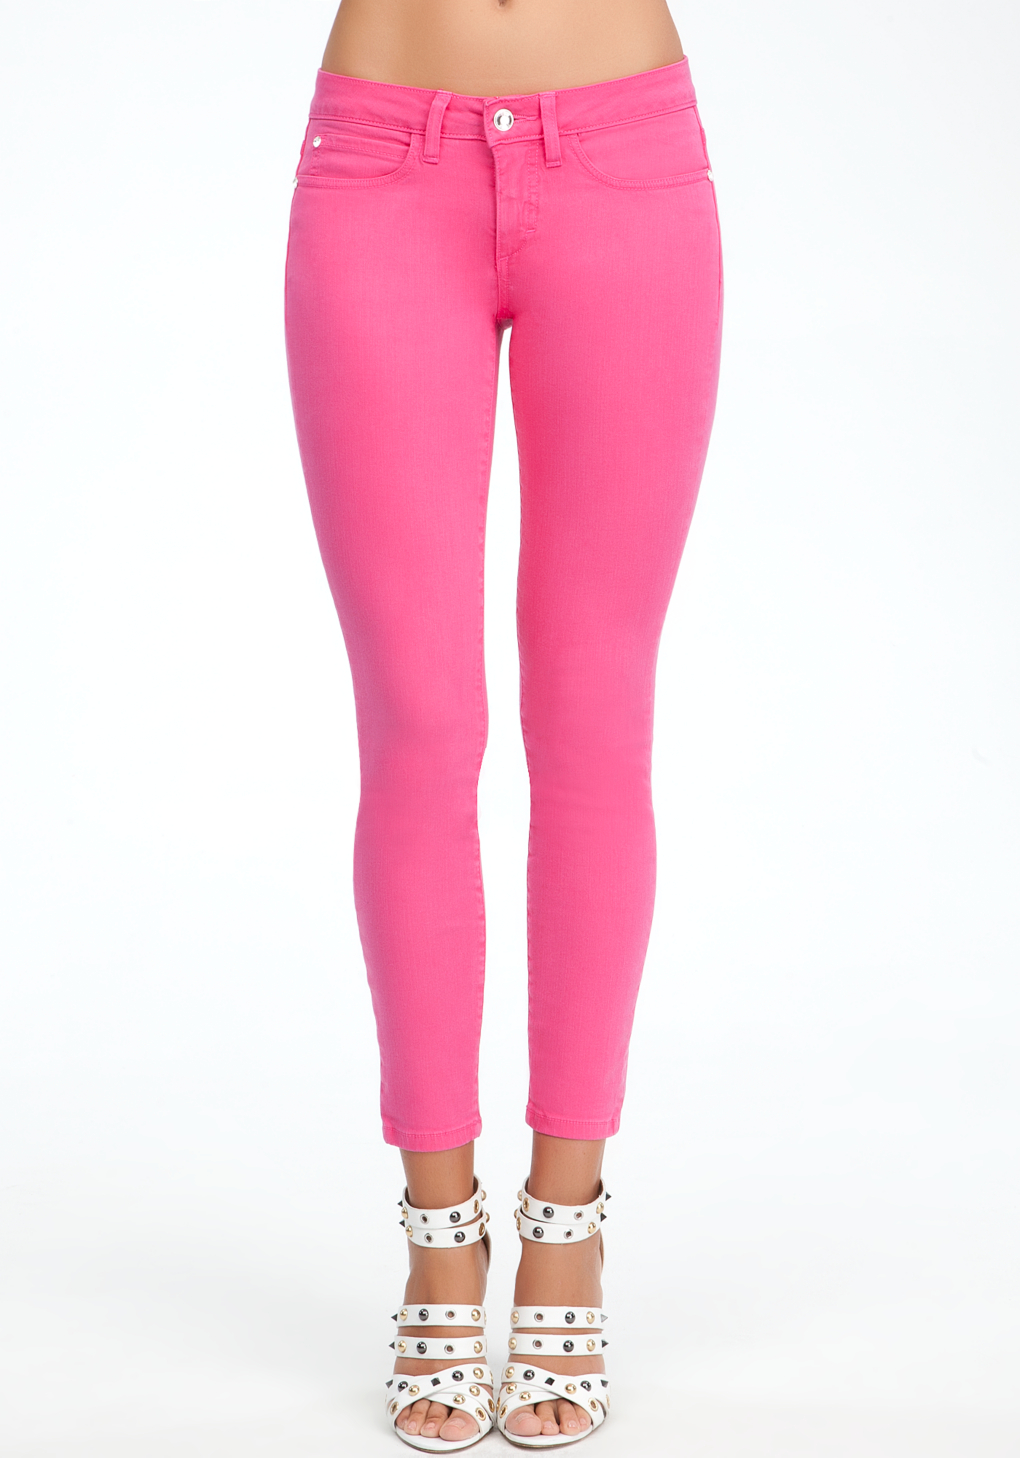 Lyst - Bebe Logo Stretch Skinny Jeans Online Exclusive in Pink